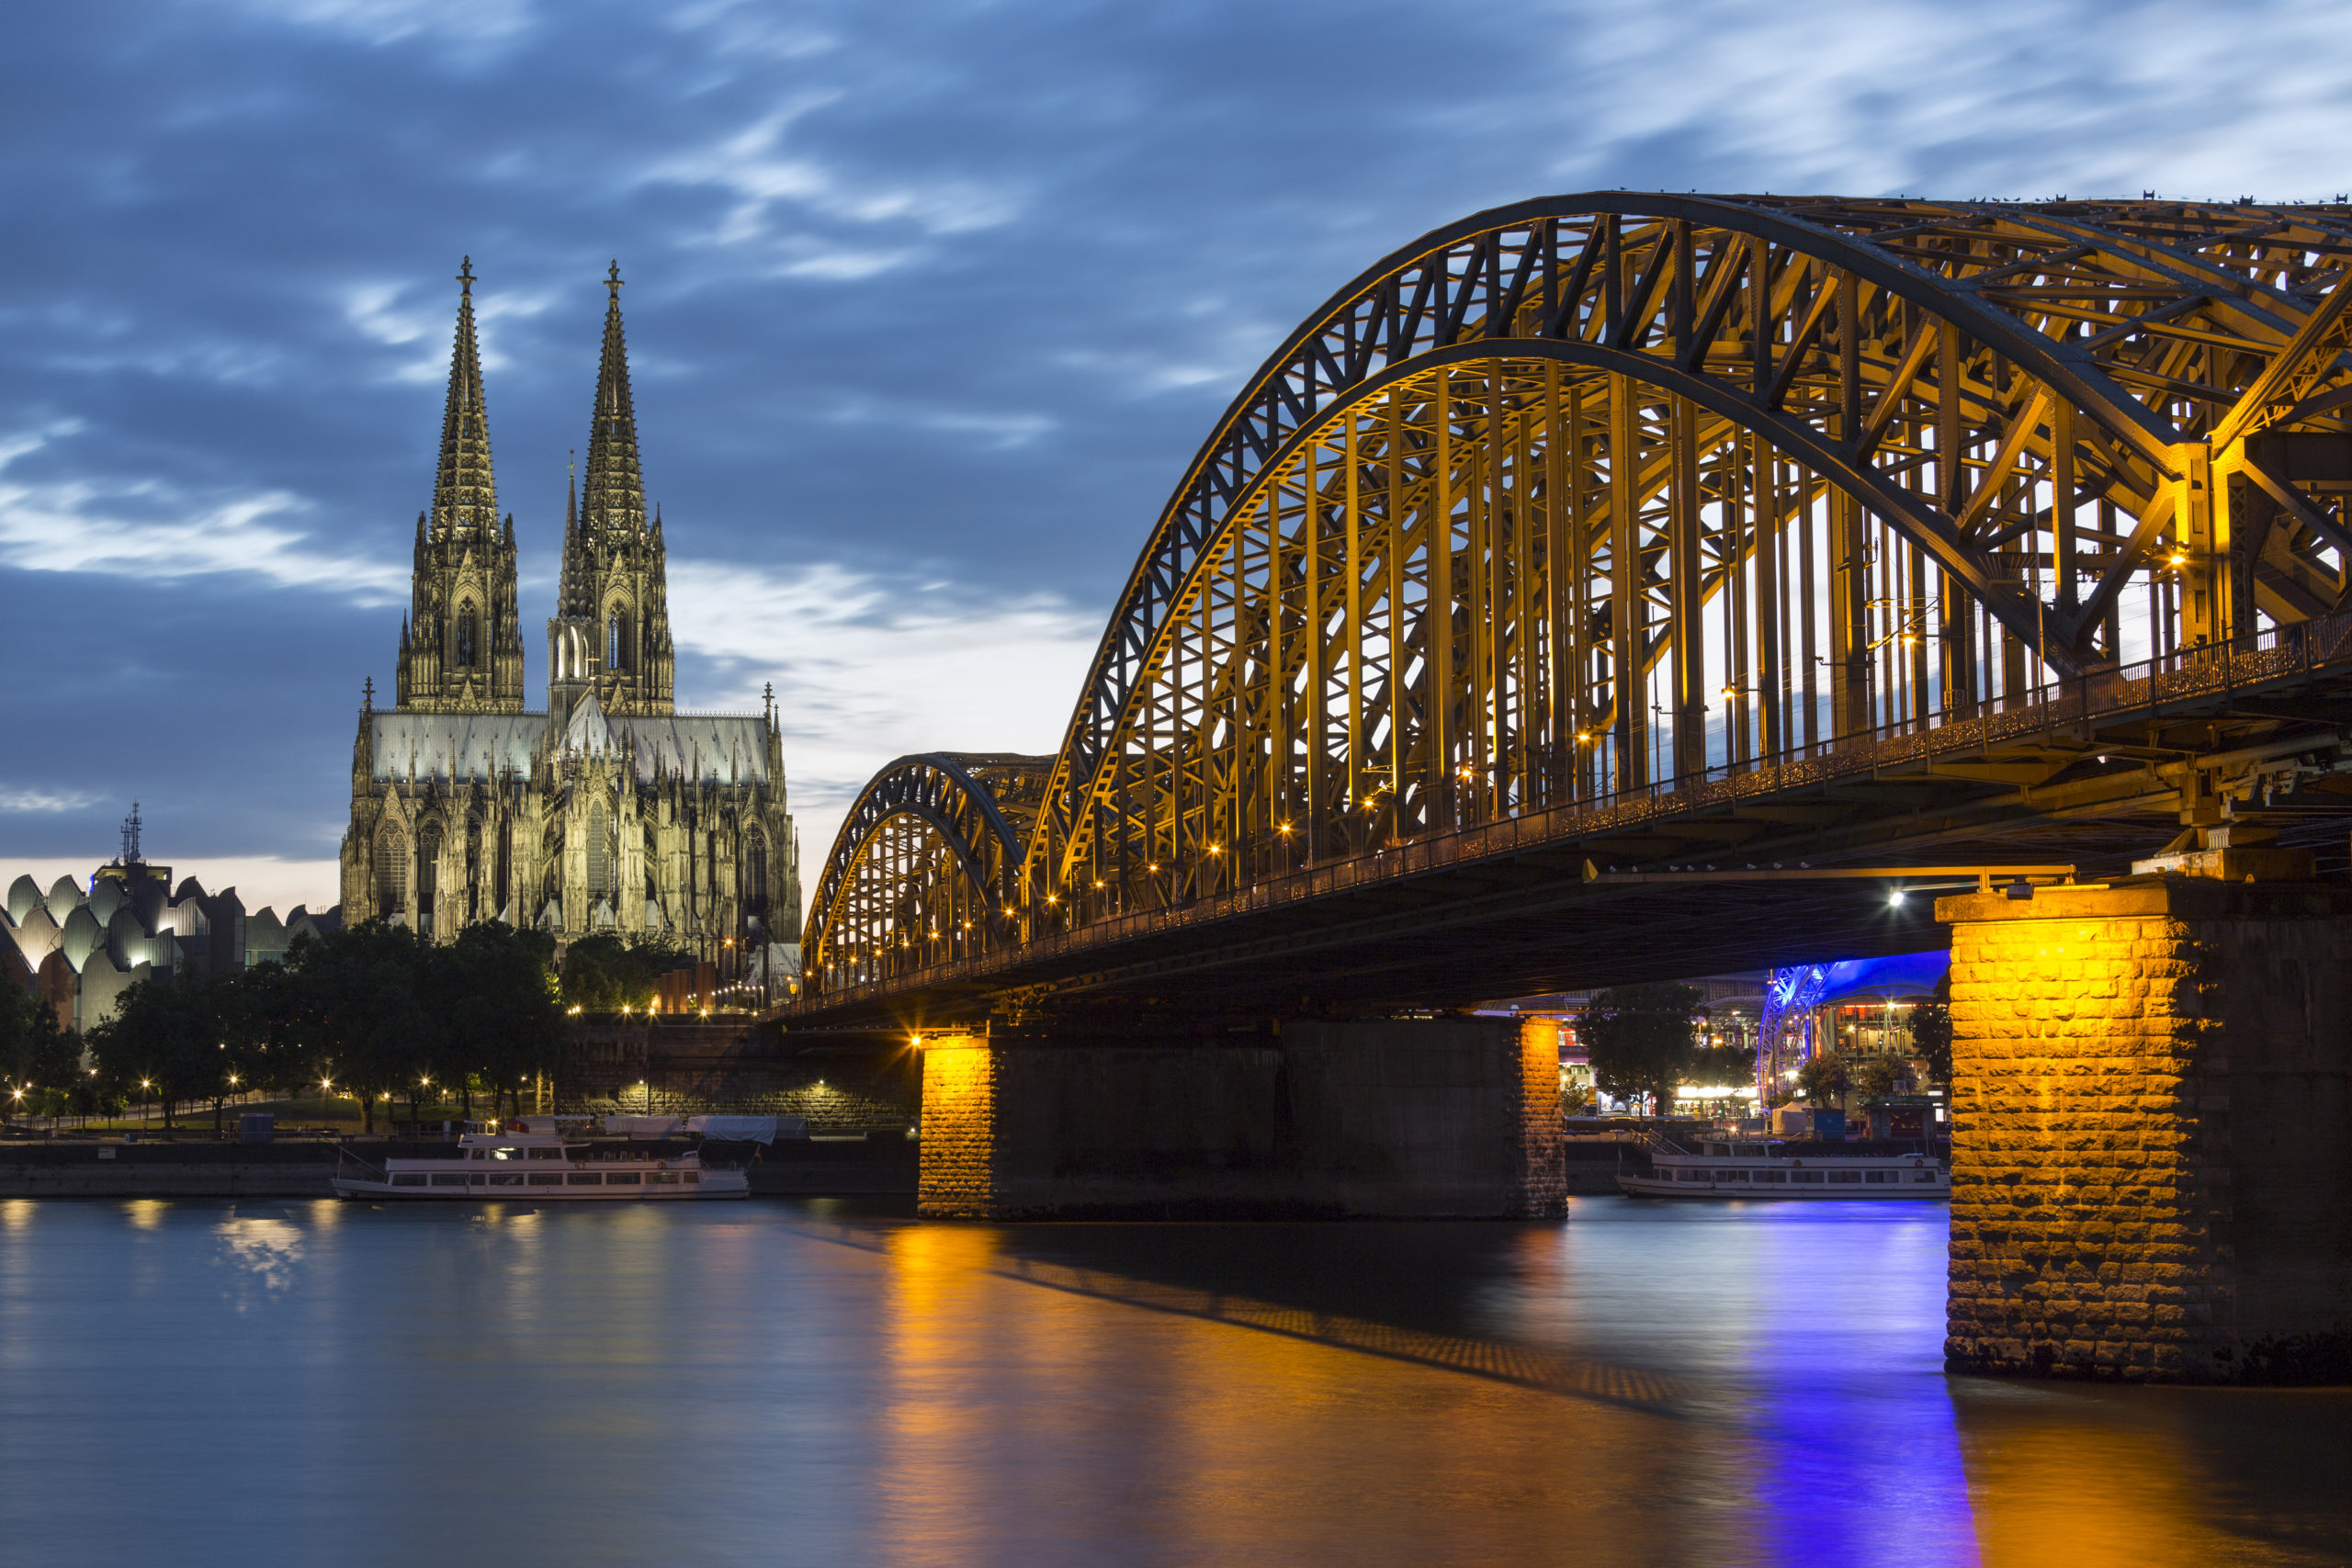 Cologne – Germany